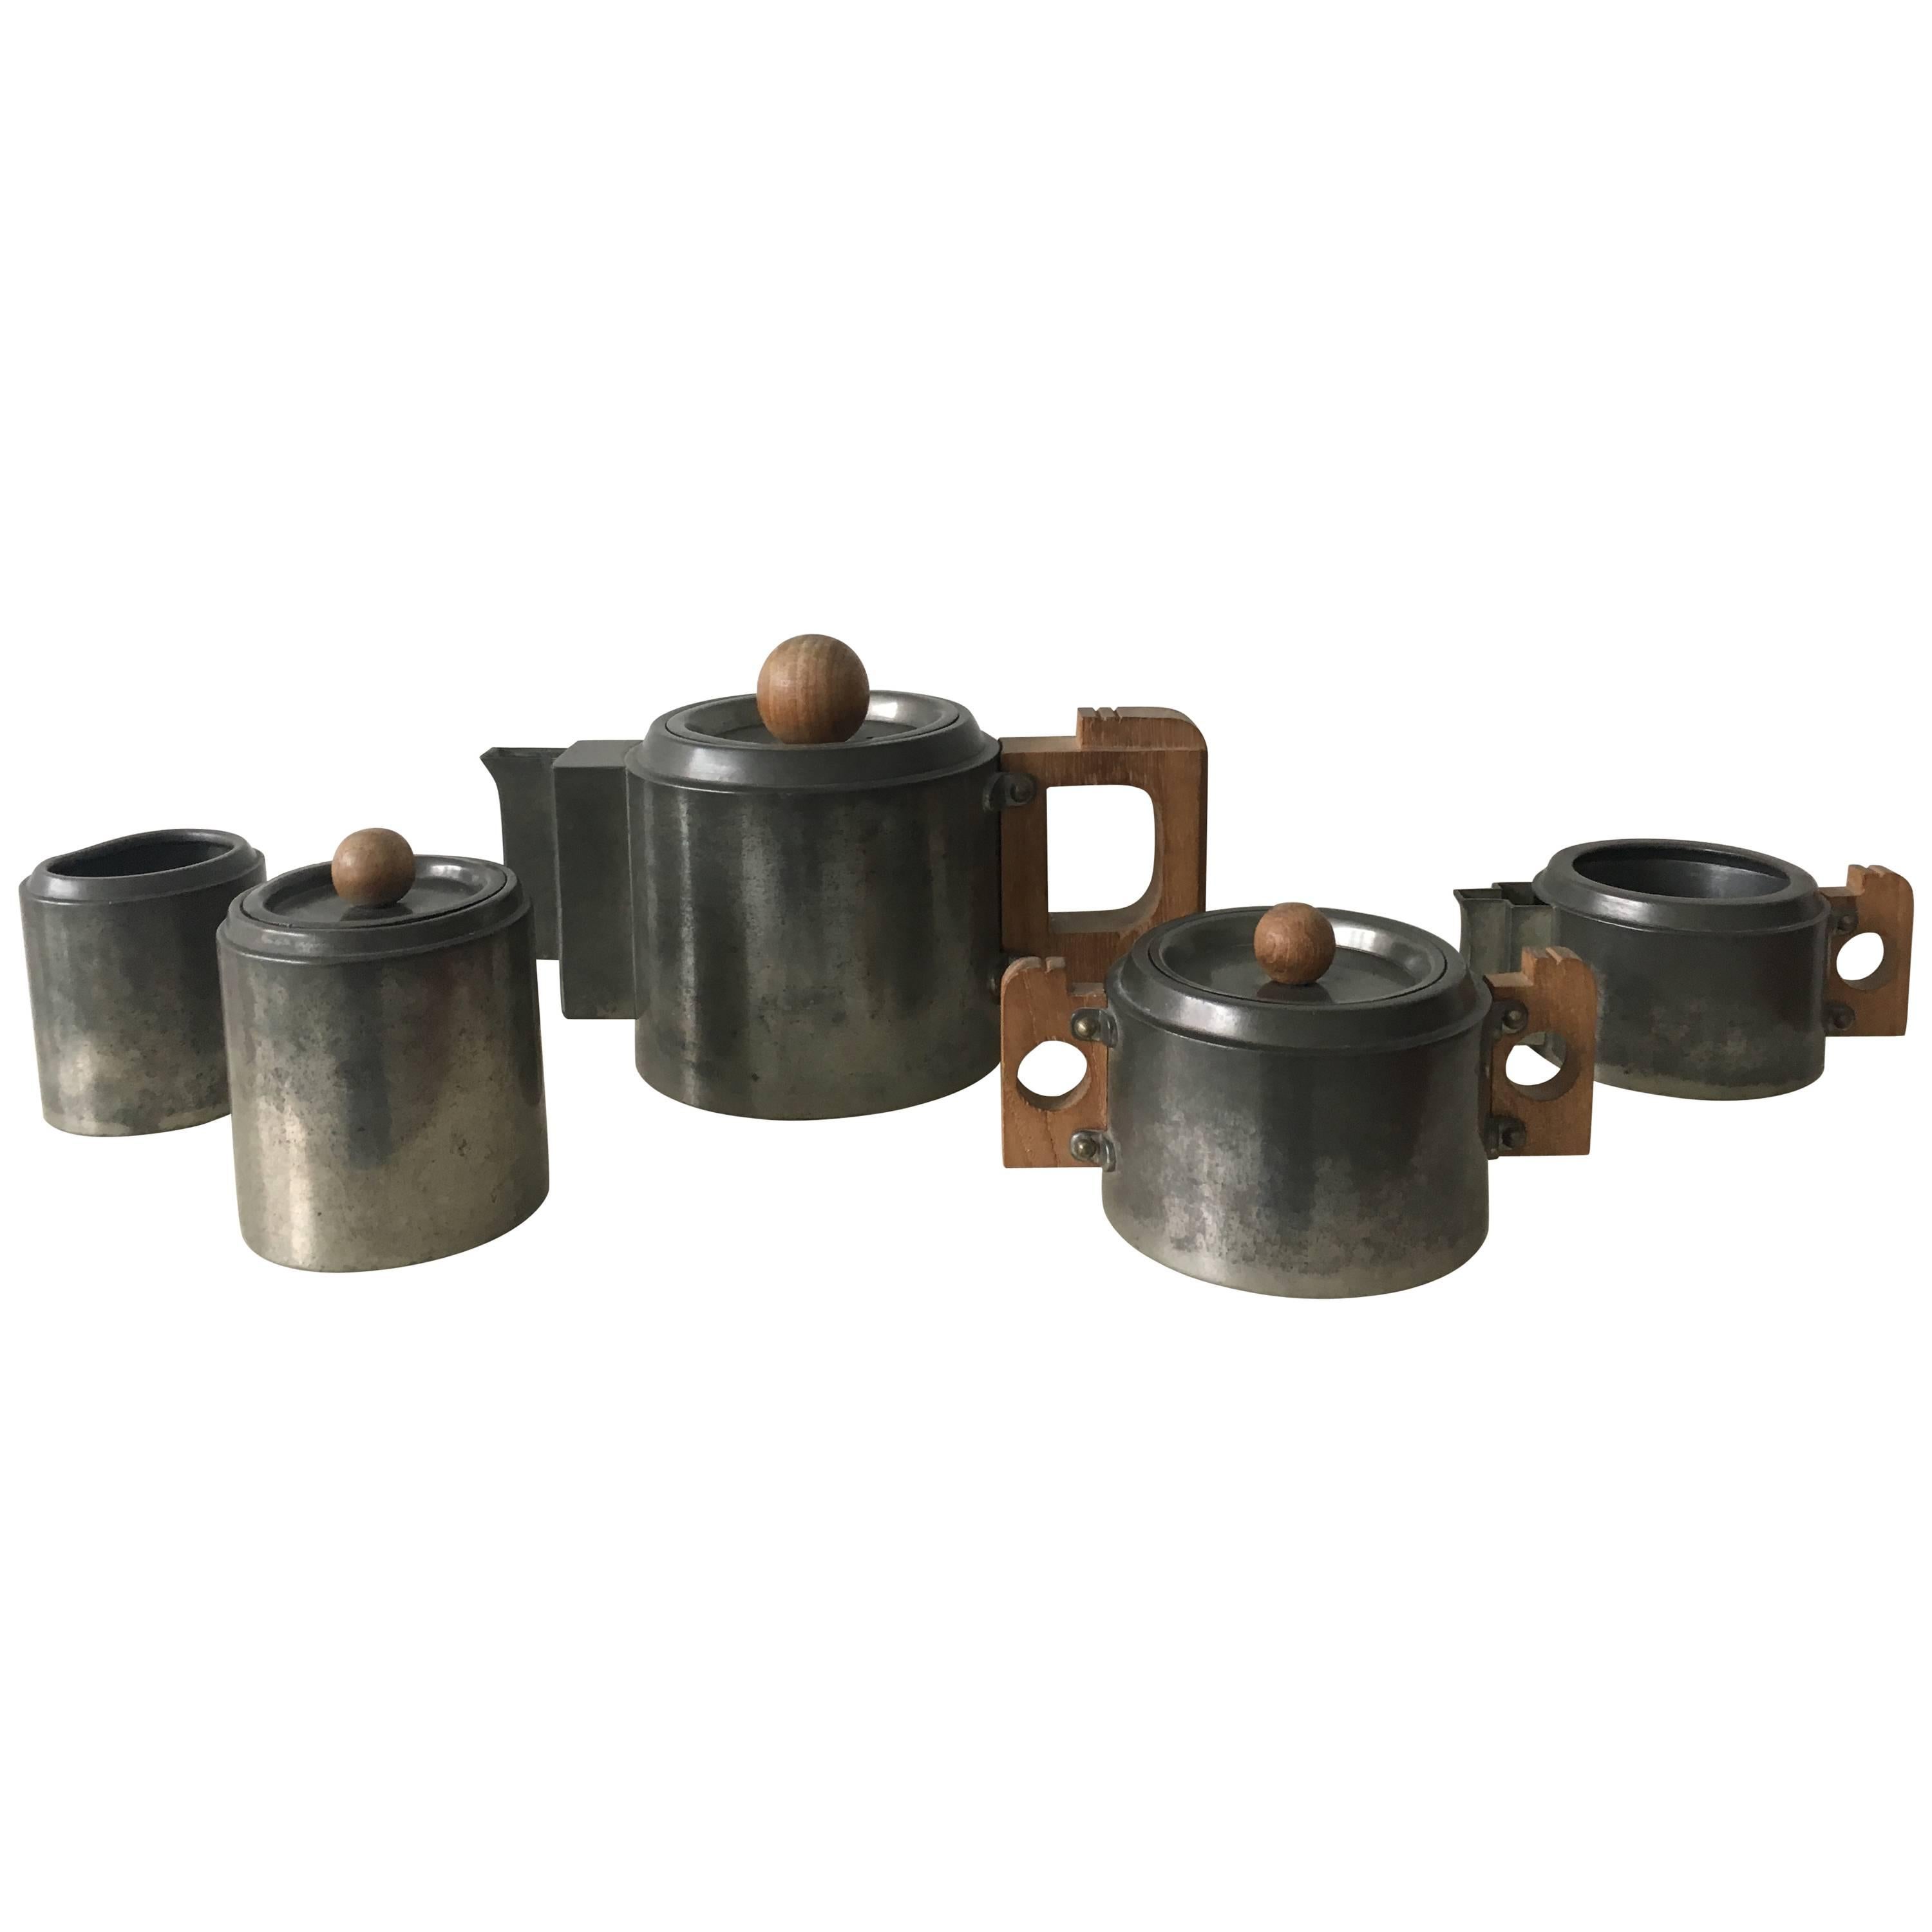 Art Deco Tea Service, Pewter with Wooden Knobs and Handles, circa 1925 For Sale